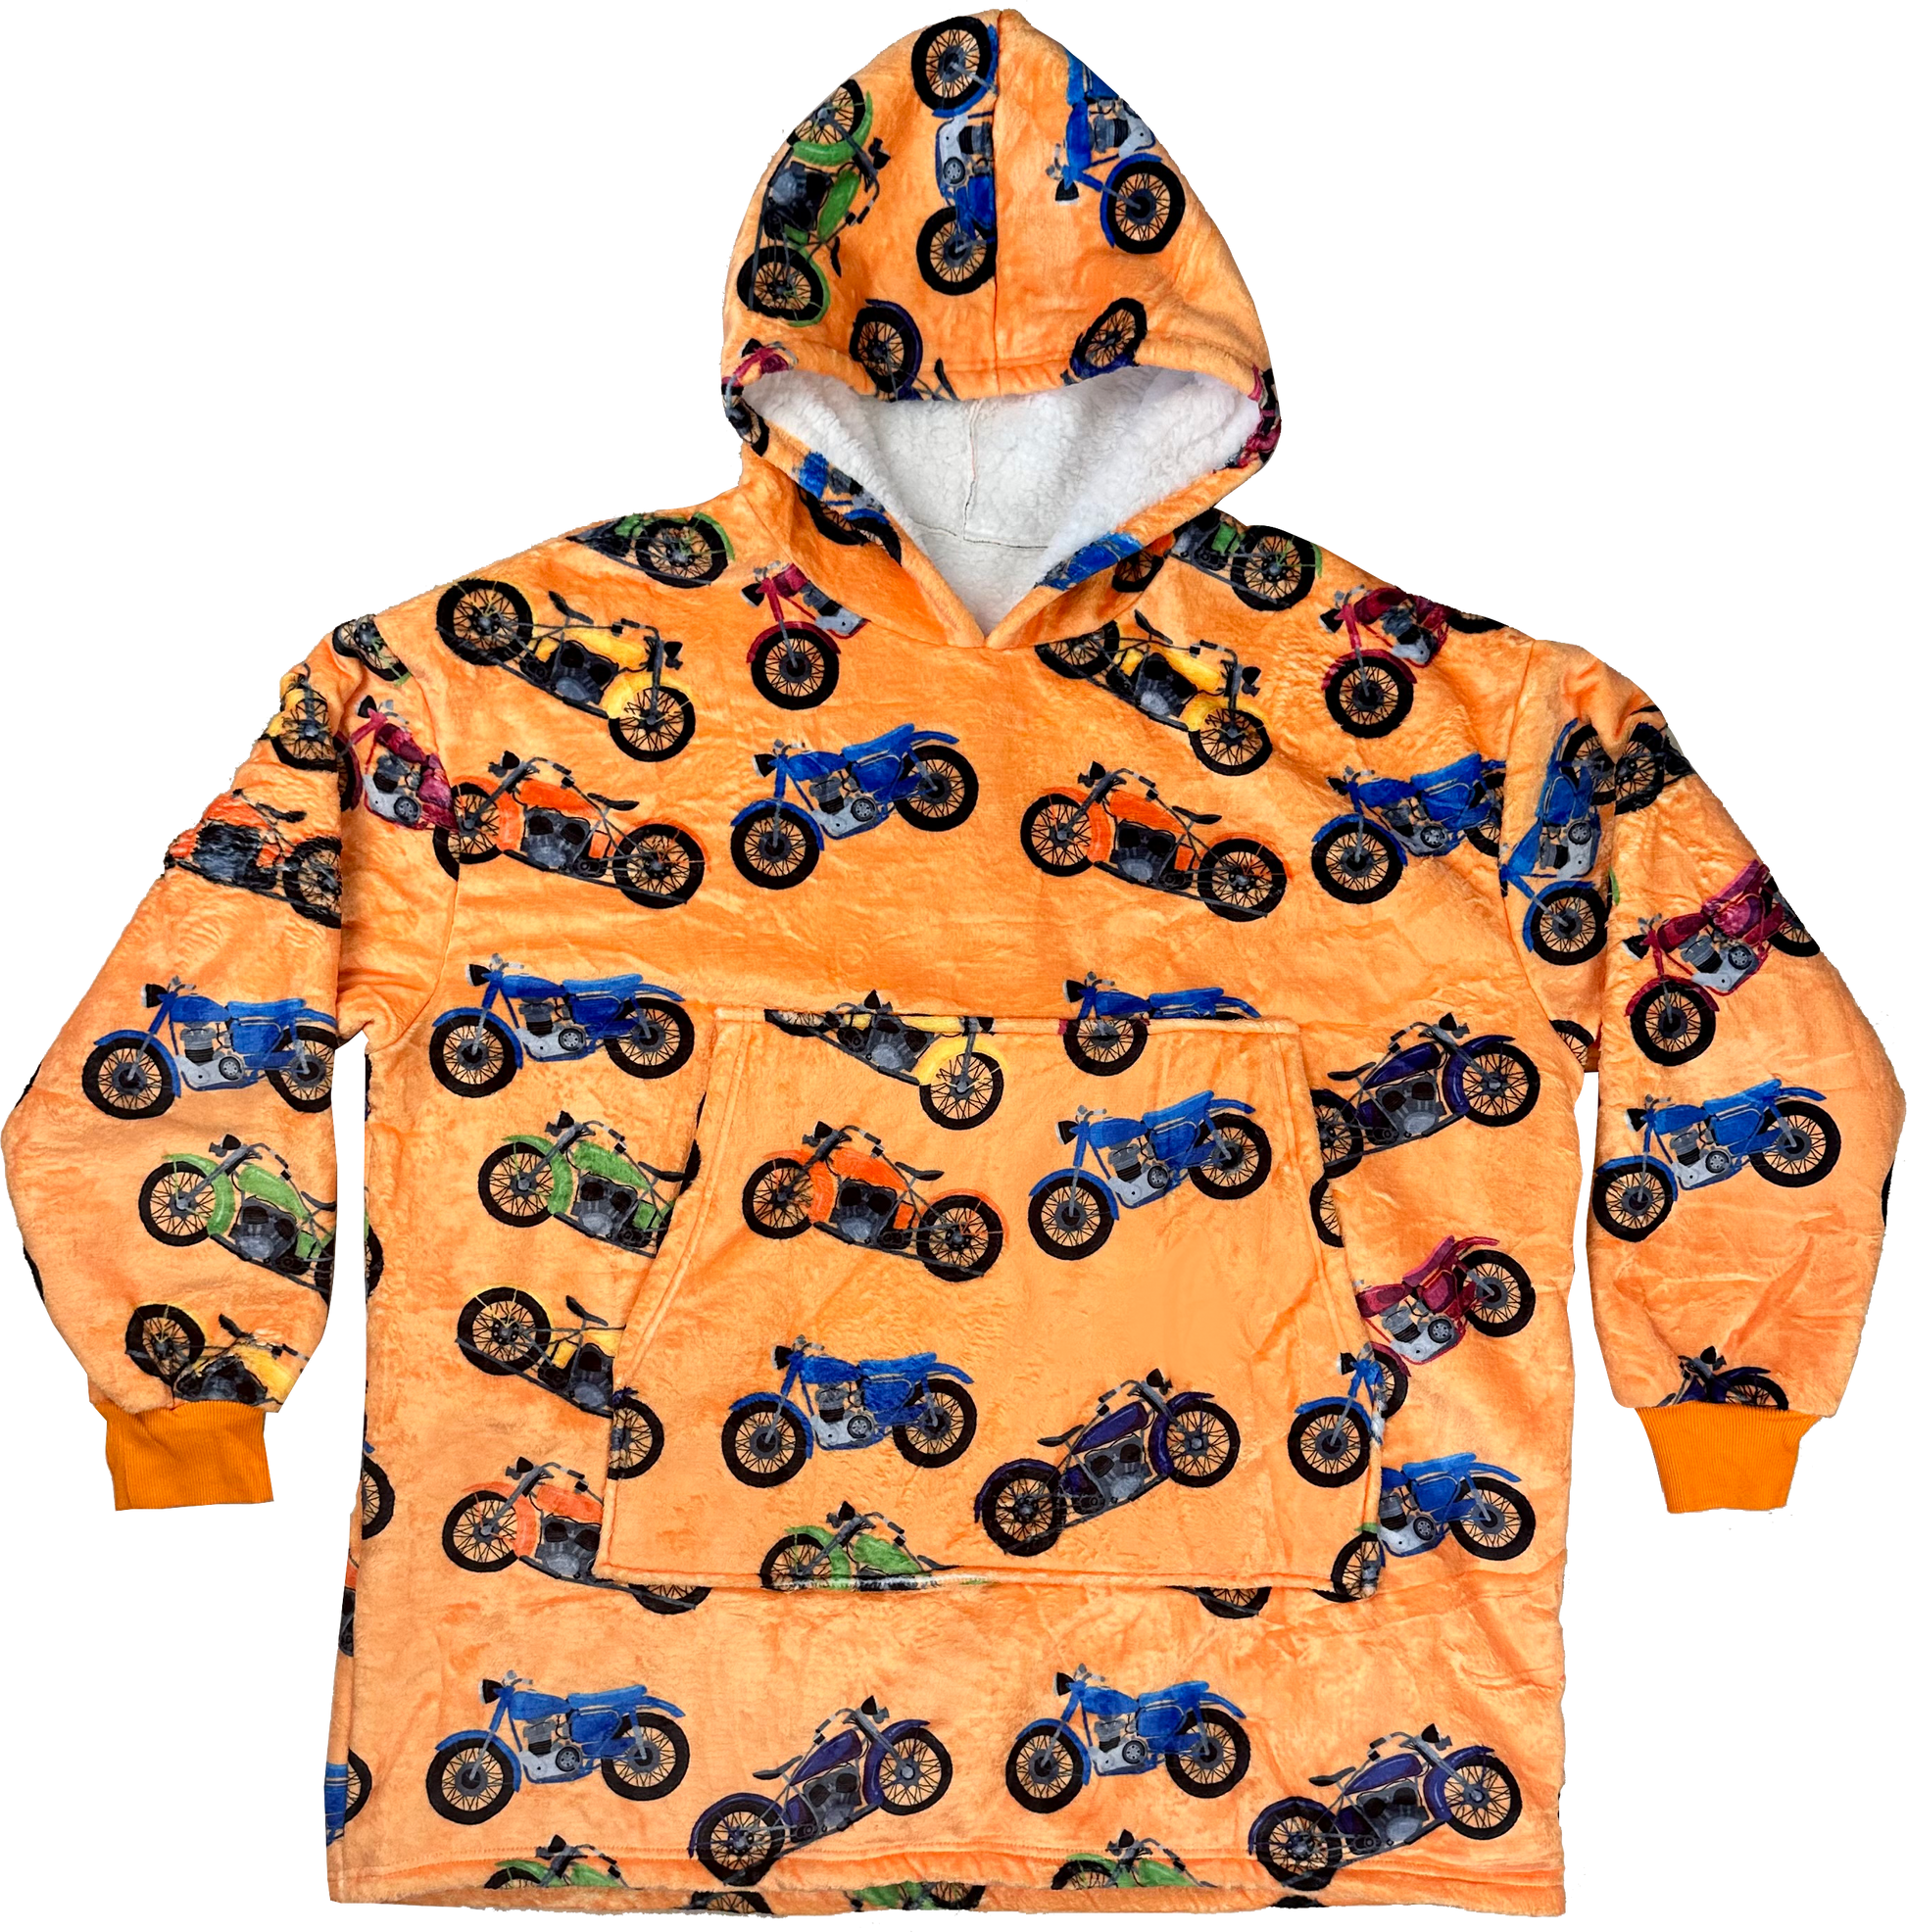 Motorcycle themed cozy wearable blanket